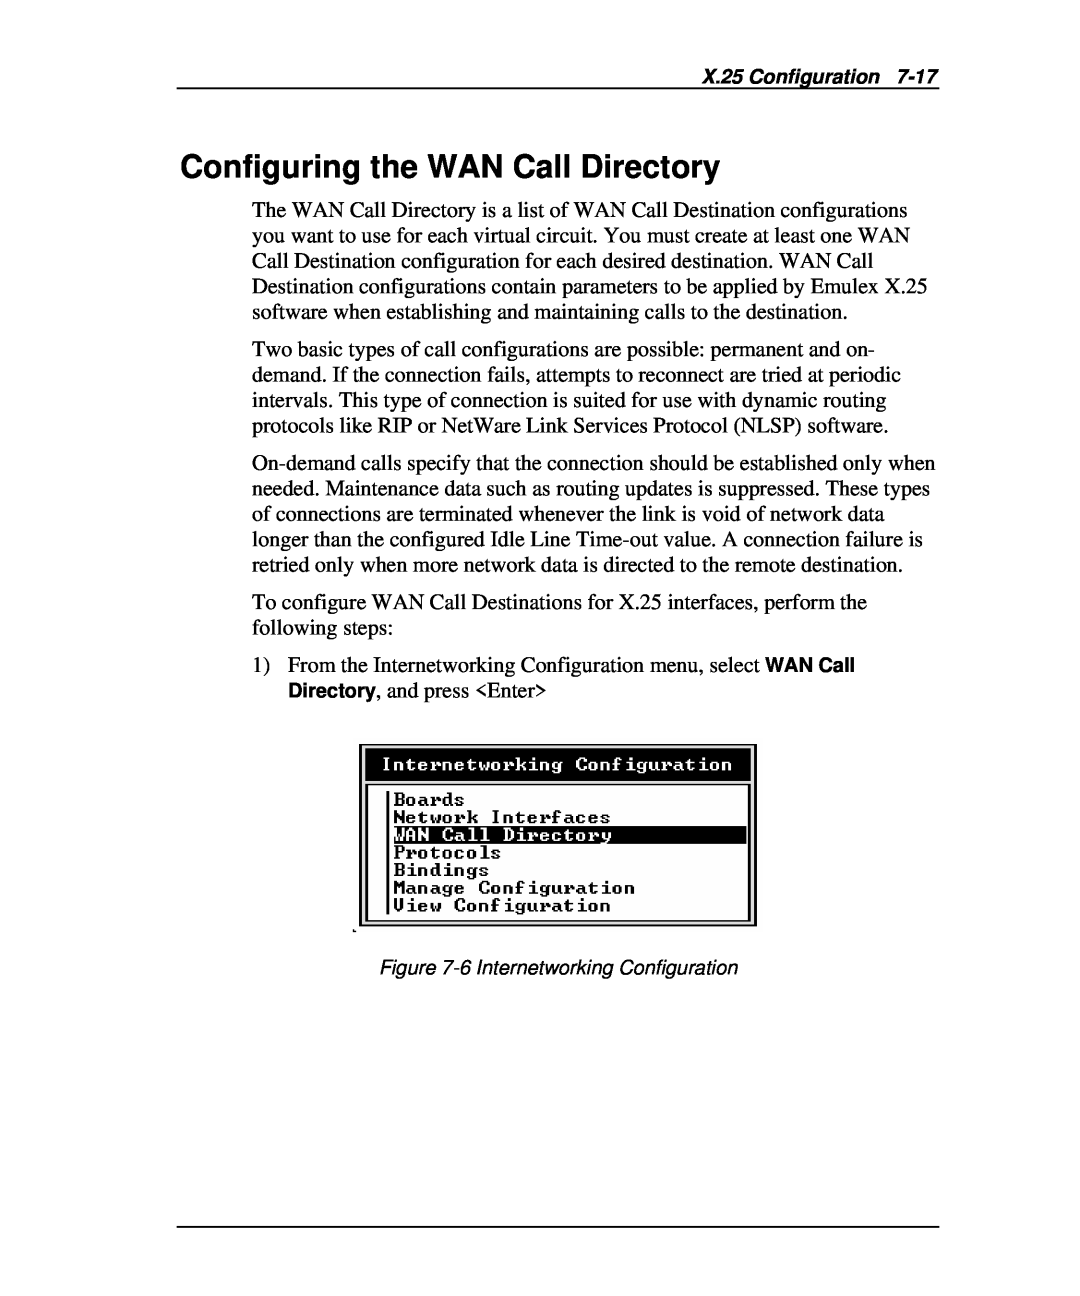 Emulex DCP_link manual Configuring the WAN Call Directory, 6 Internetworking Configuration 